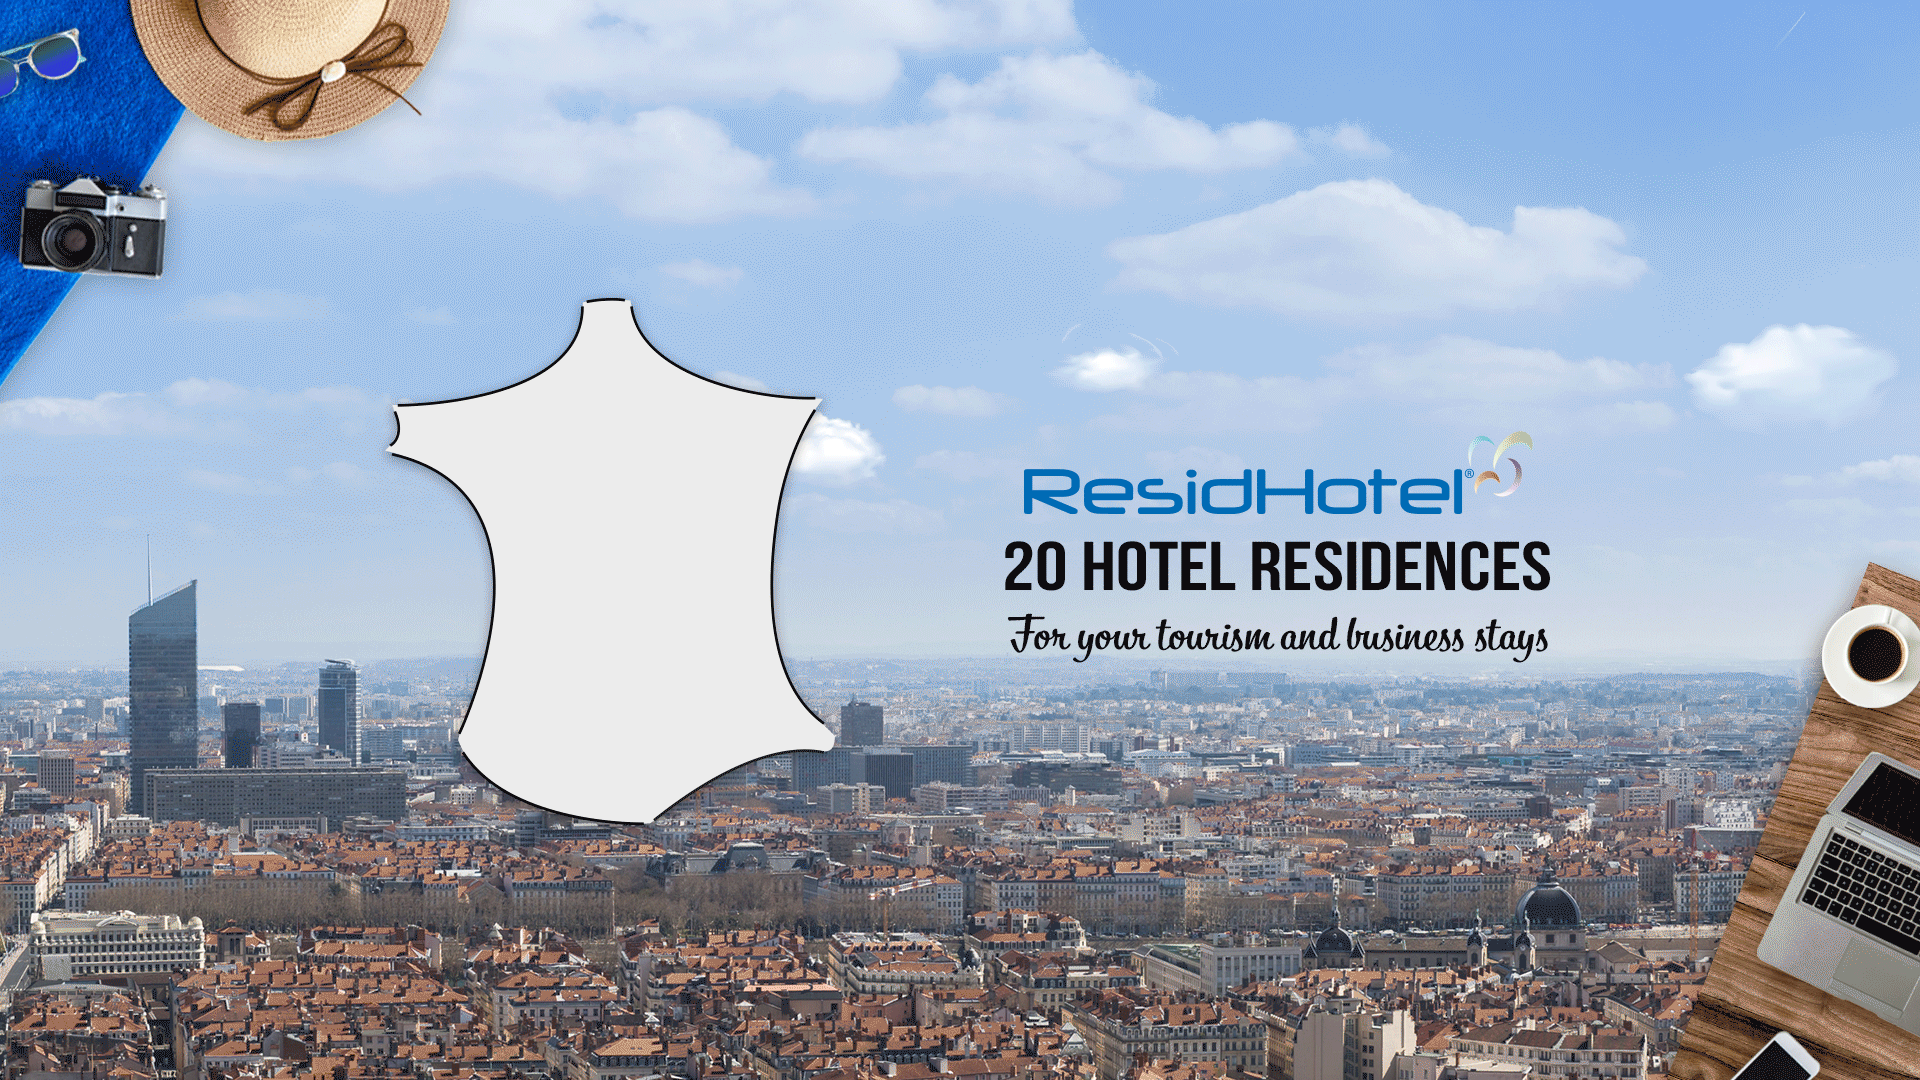 ResidHotel - Welcome to Residhotel